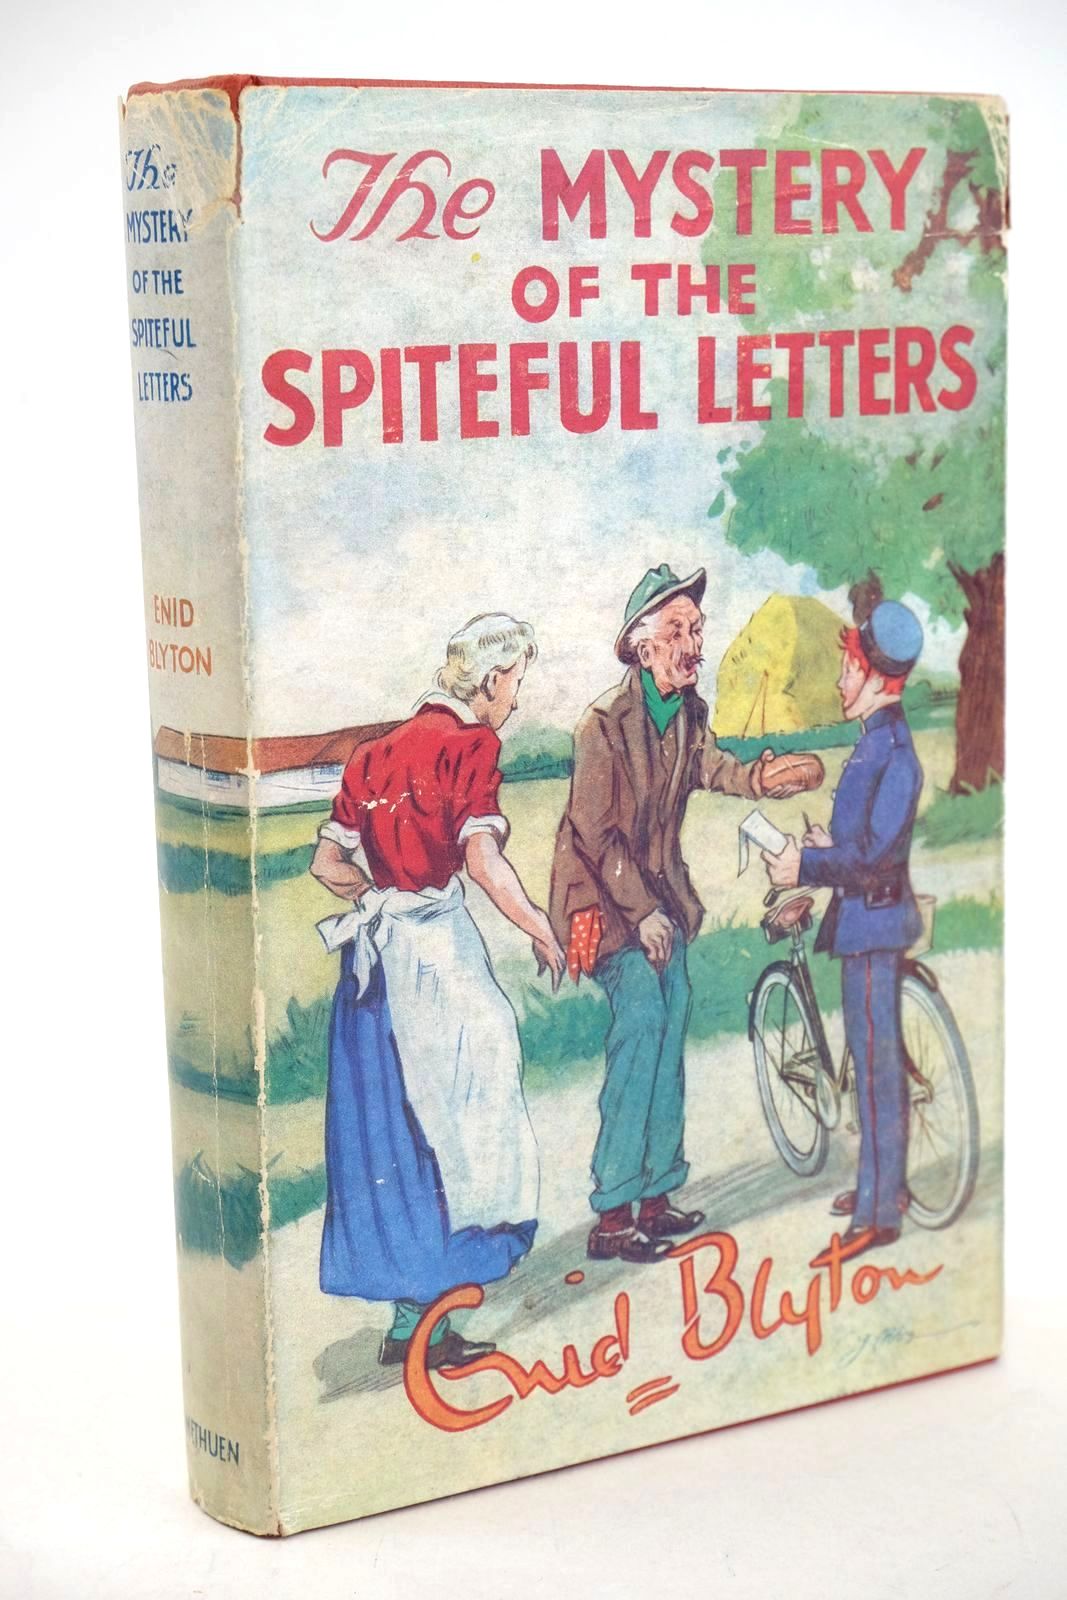 Photo of THE MYSTERY OF THE SPITEFUL LETTERS written by Blyton, Enid illustrated by Abbey, J. published by Methuen &amp; Co. Ltd. (STOCK CODE: 1326924)  for sale by Stella & Rose's Books